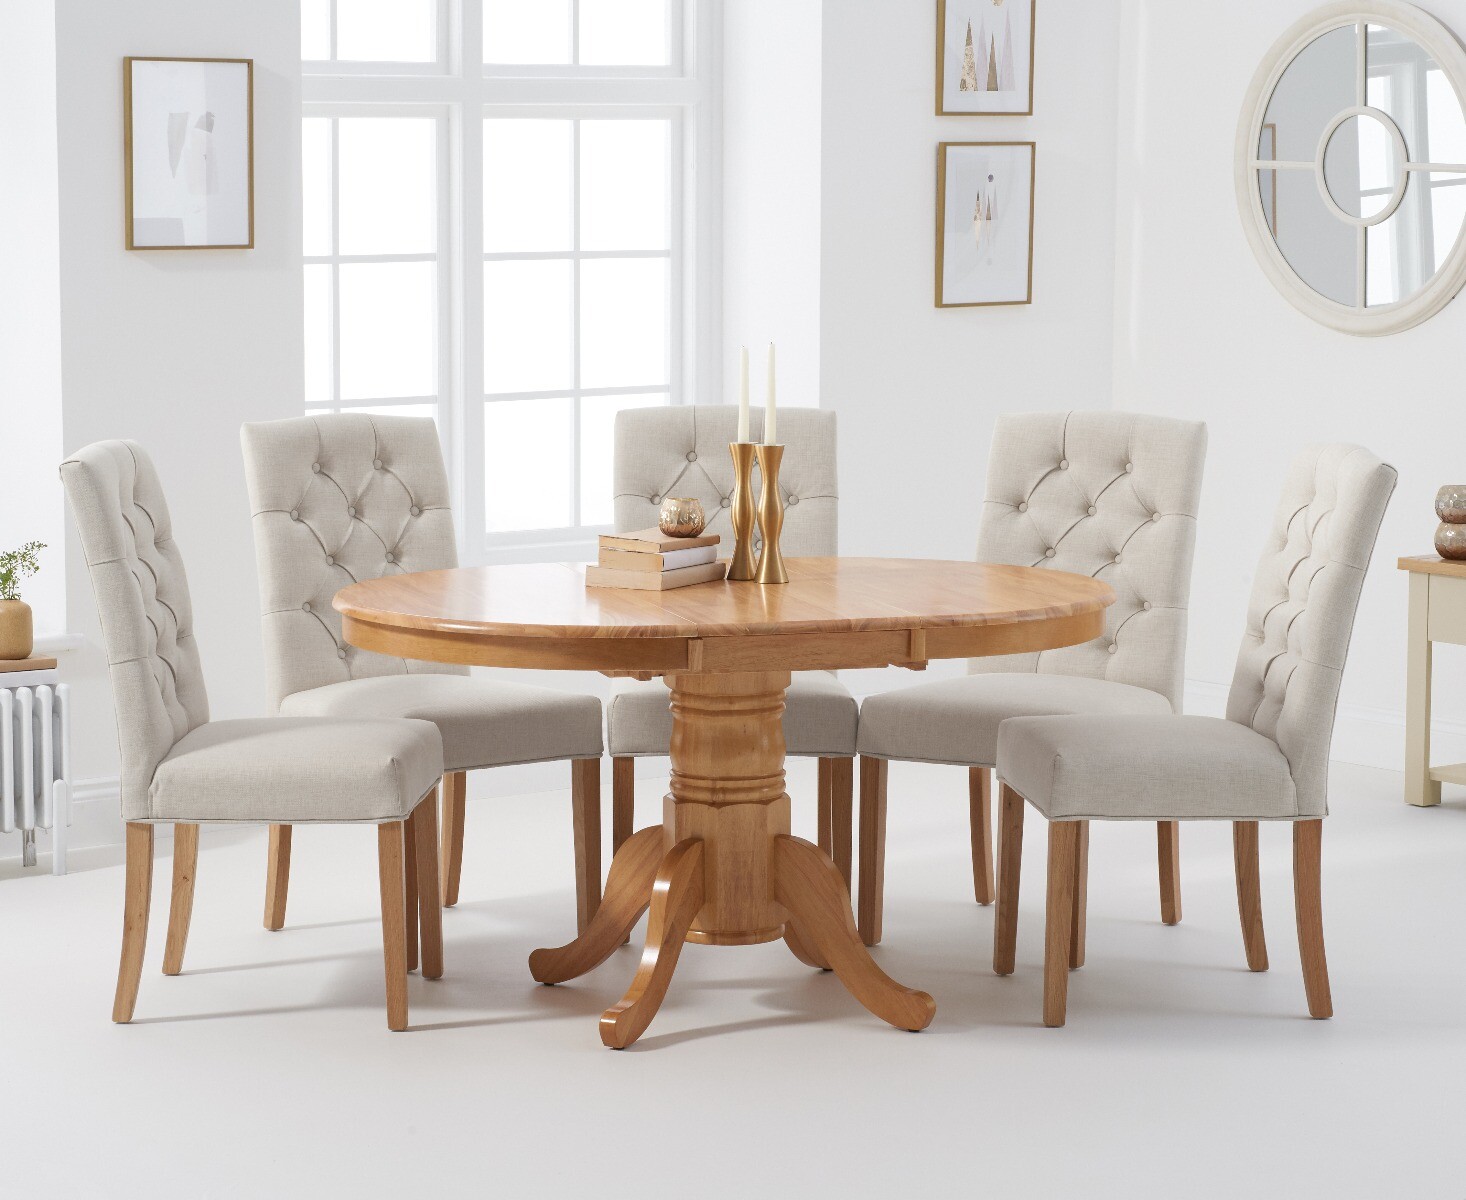 Photo 1 of Extending epsom oak pedestal table with 6 natural isabella chairs